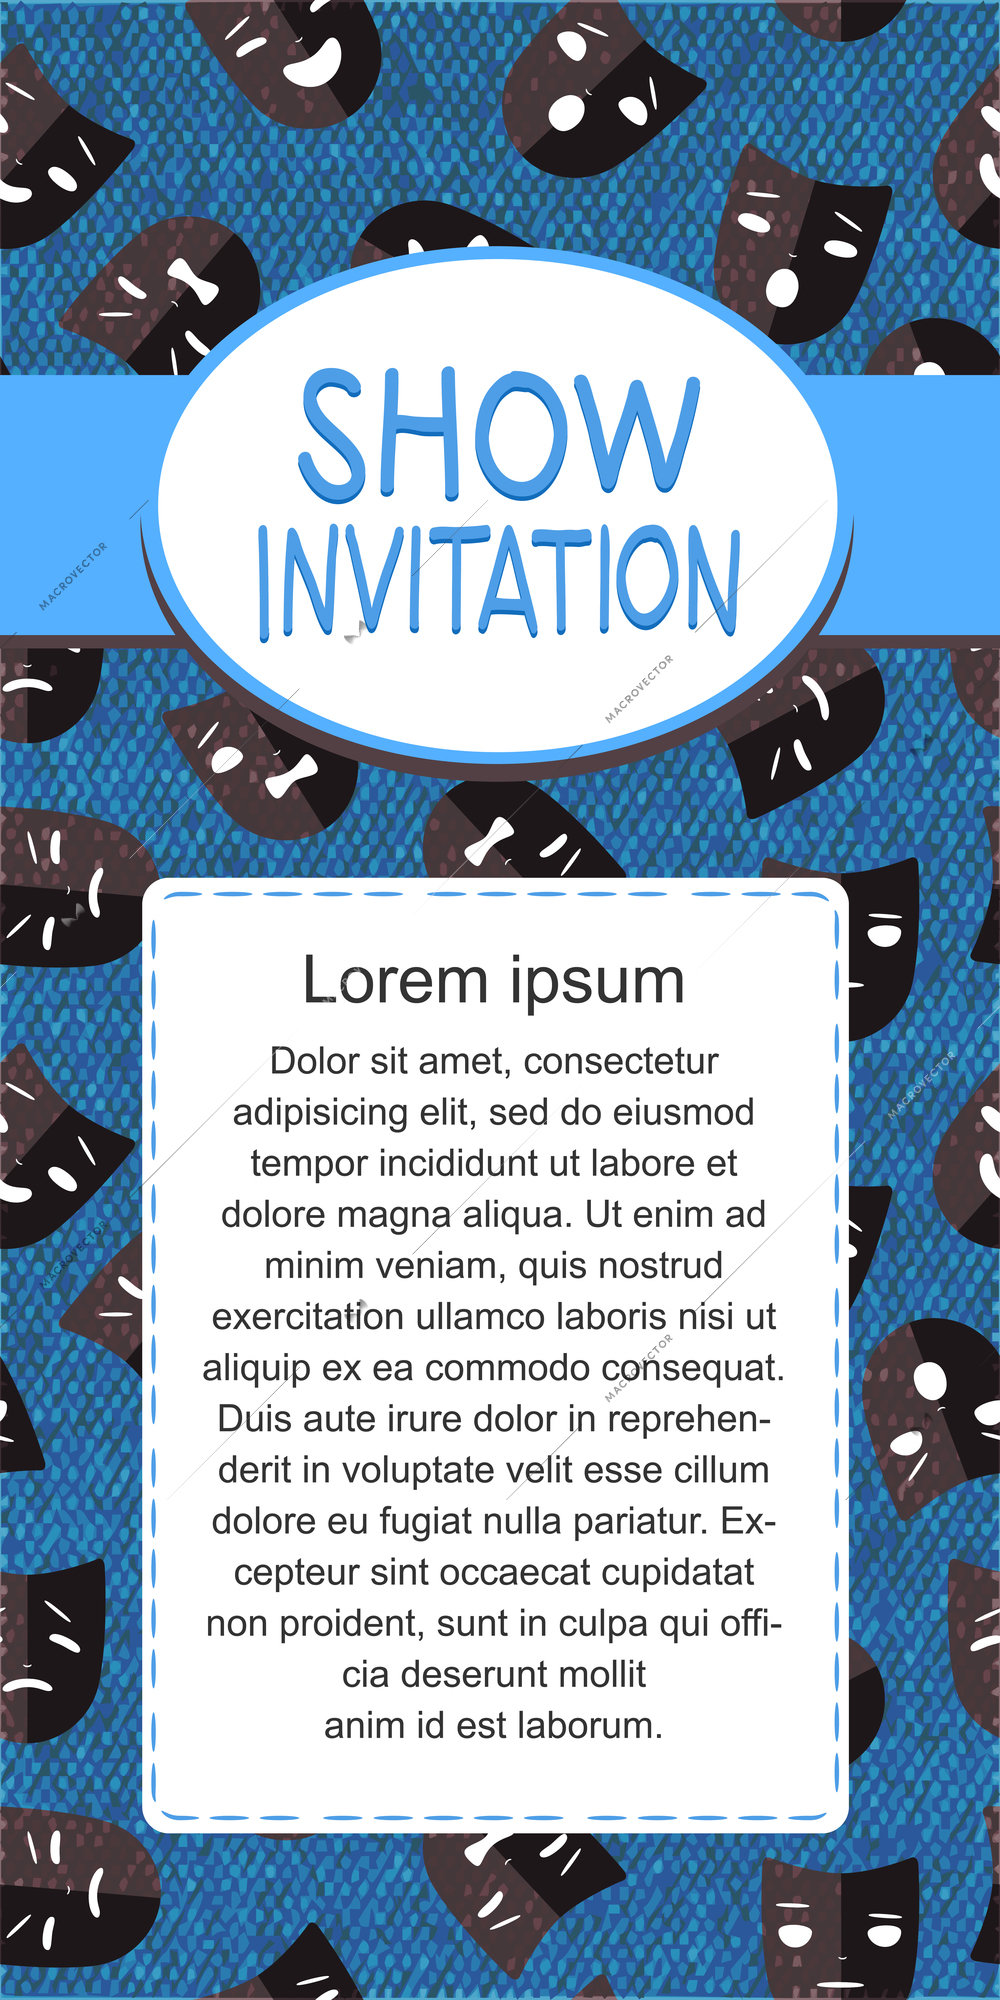 Theater show invitation for drama and humor vector illustration